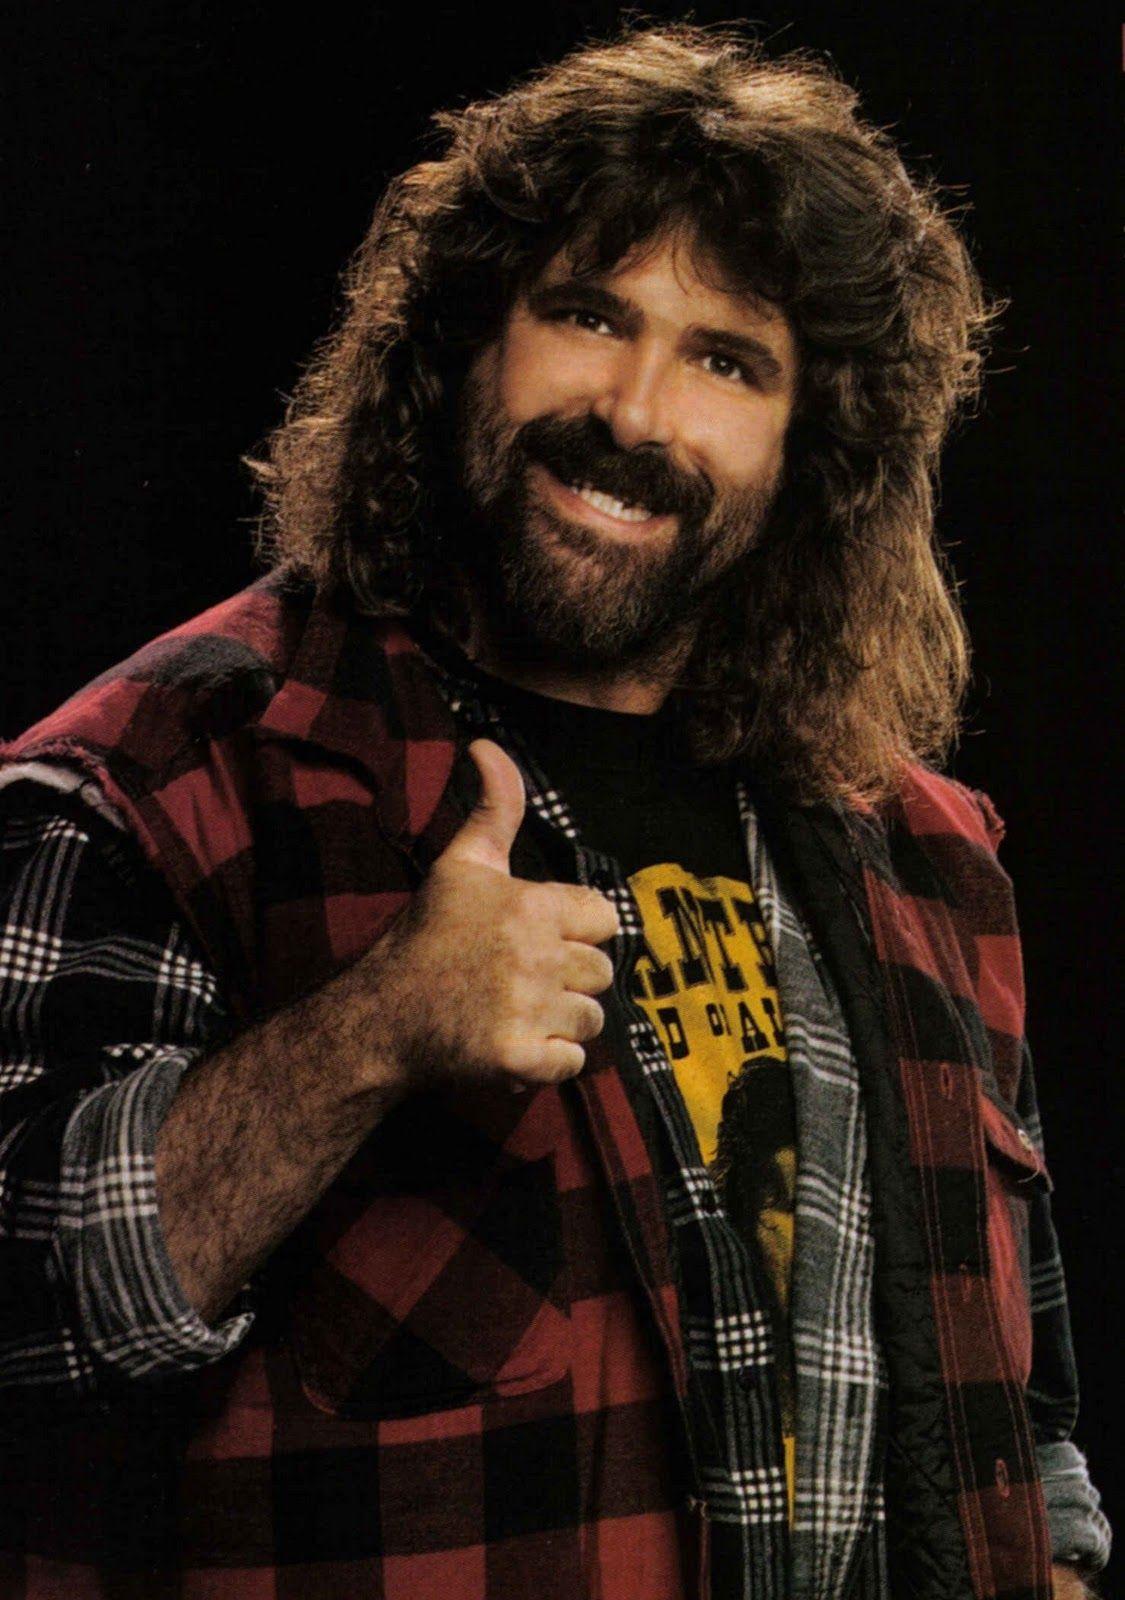 Cactus Jack Have a Nice Day. The Squared Circle